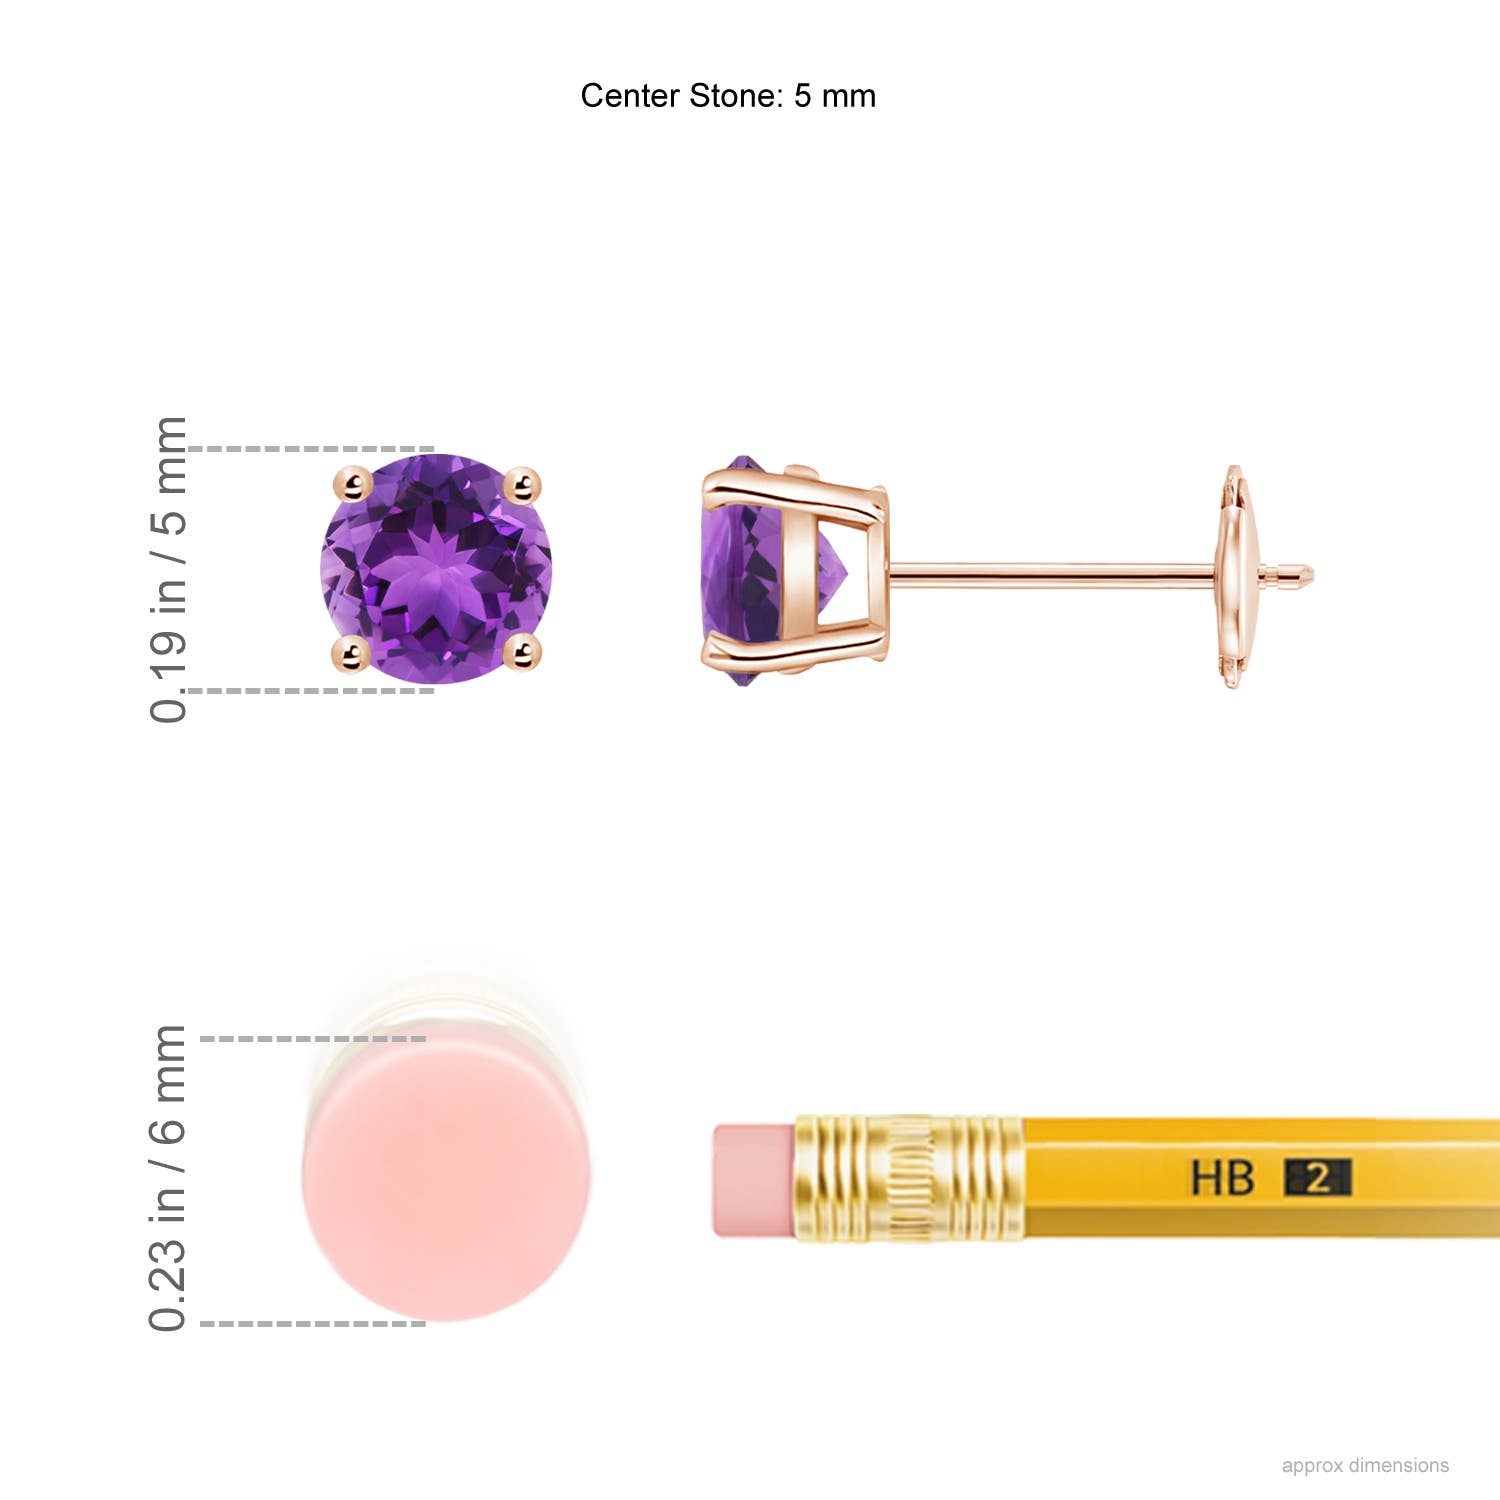 AAA - Amethyst / 0.9 CT / 14 KT Rose Gold